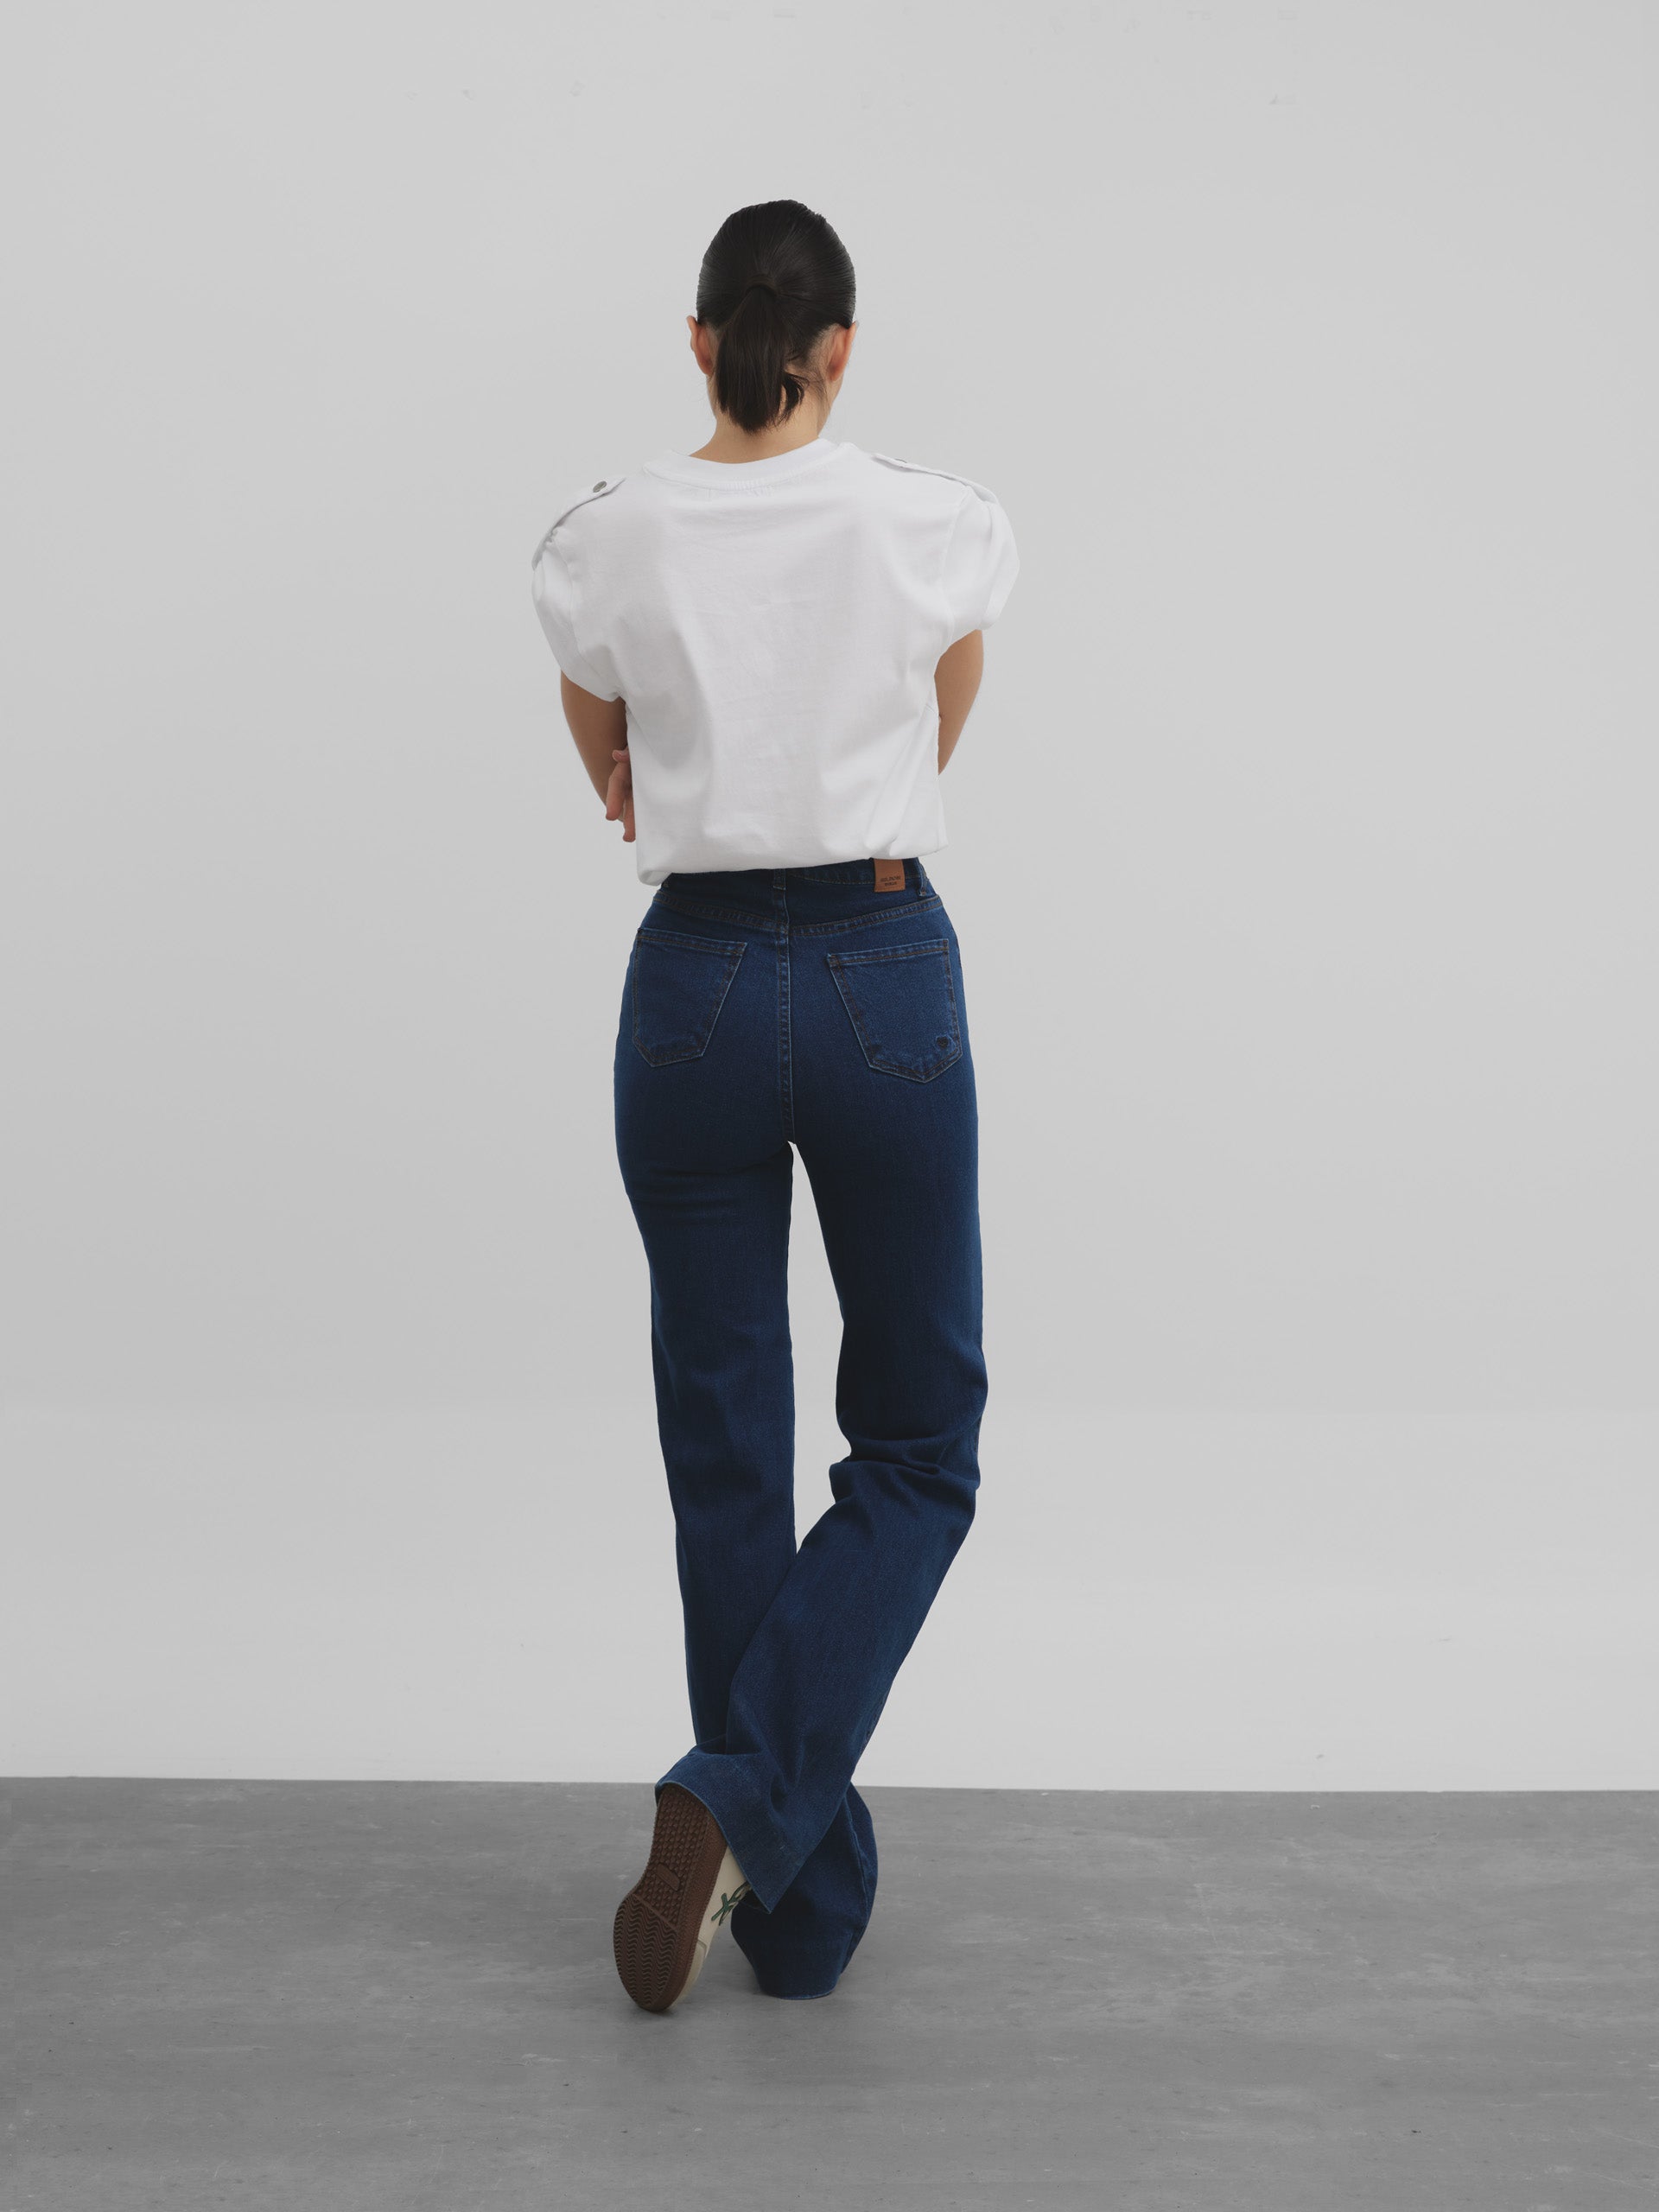 Flare denim pants with pockets